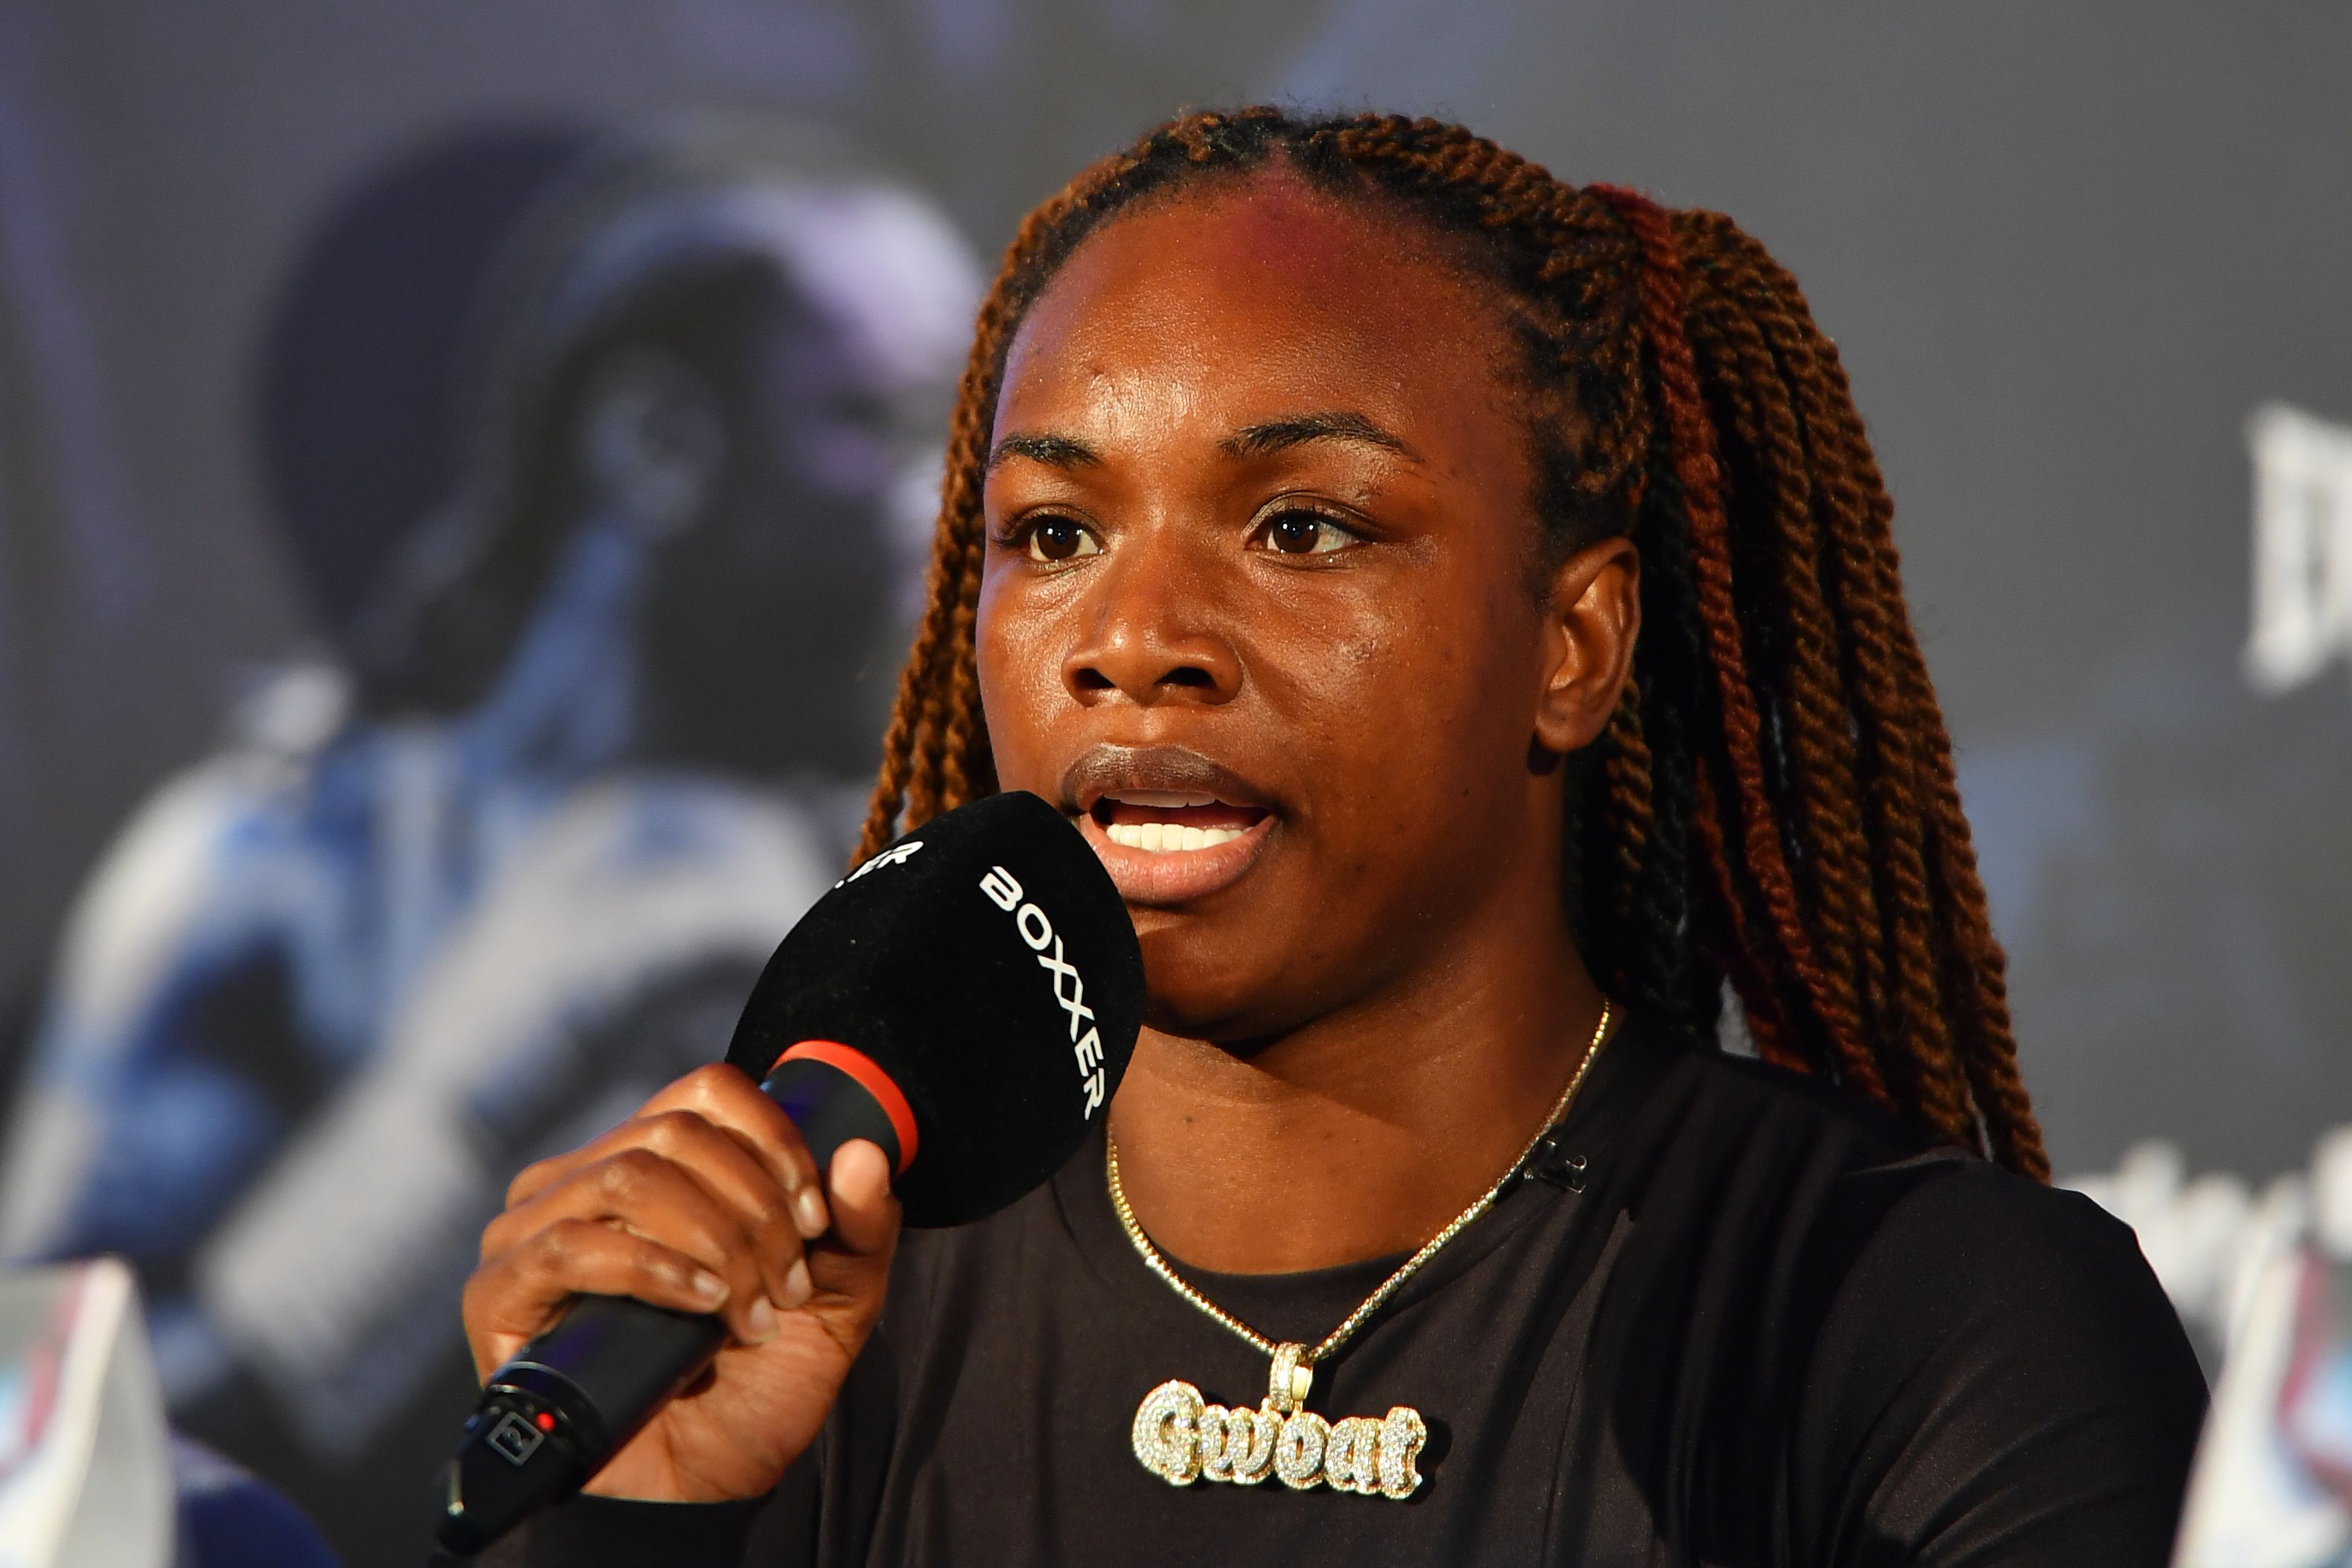 Claressa Shields talks during a press conference